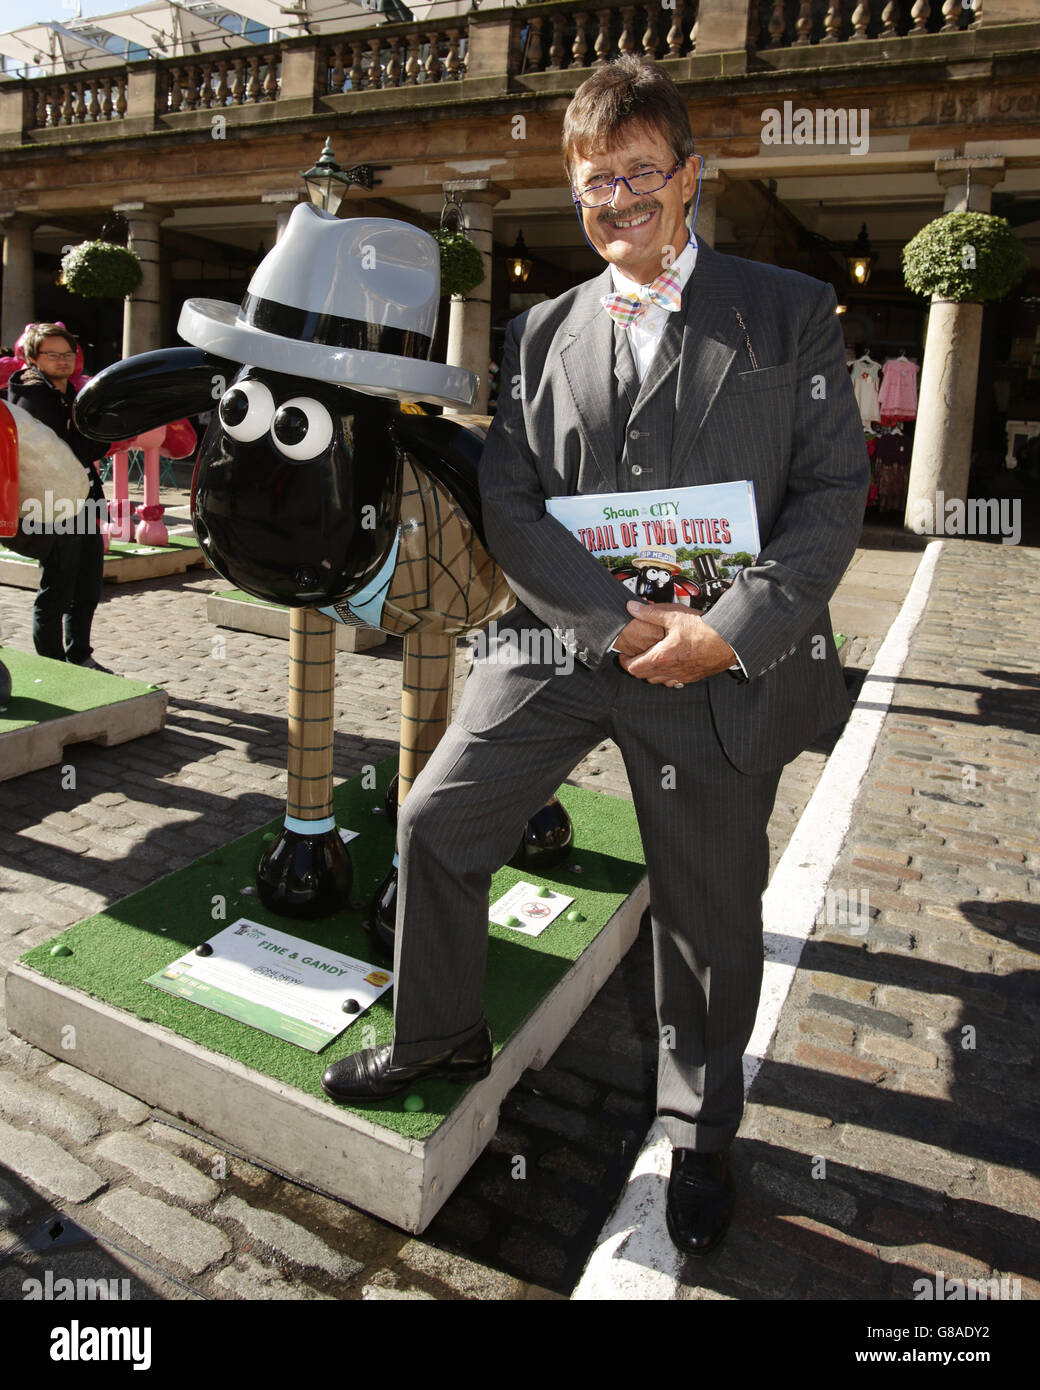 Former Bargain Hunt host Tim Wonnacott at the Shaun in the City arts campaign in Covent Garden, London, as he will be the head auctioneer. Stock Photo